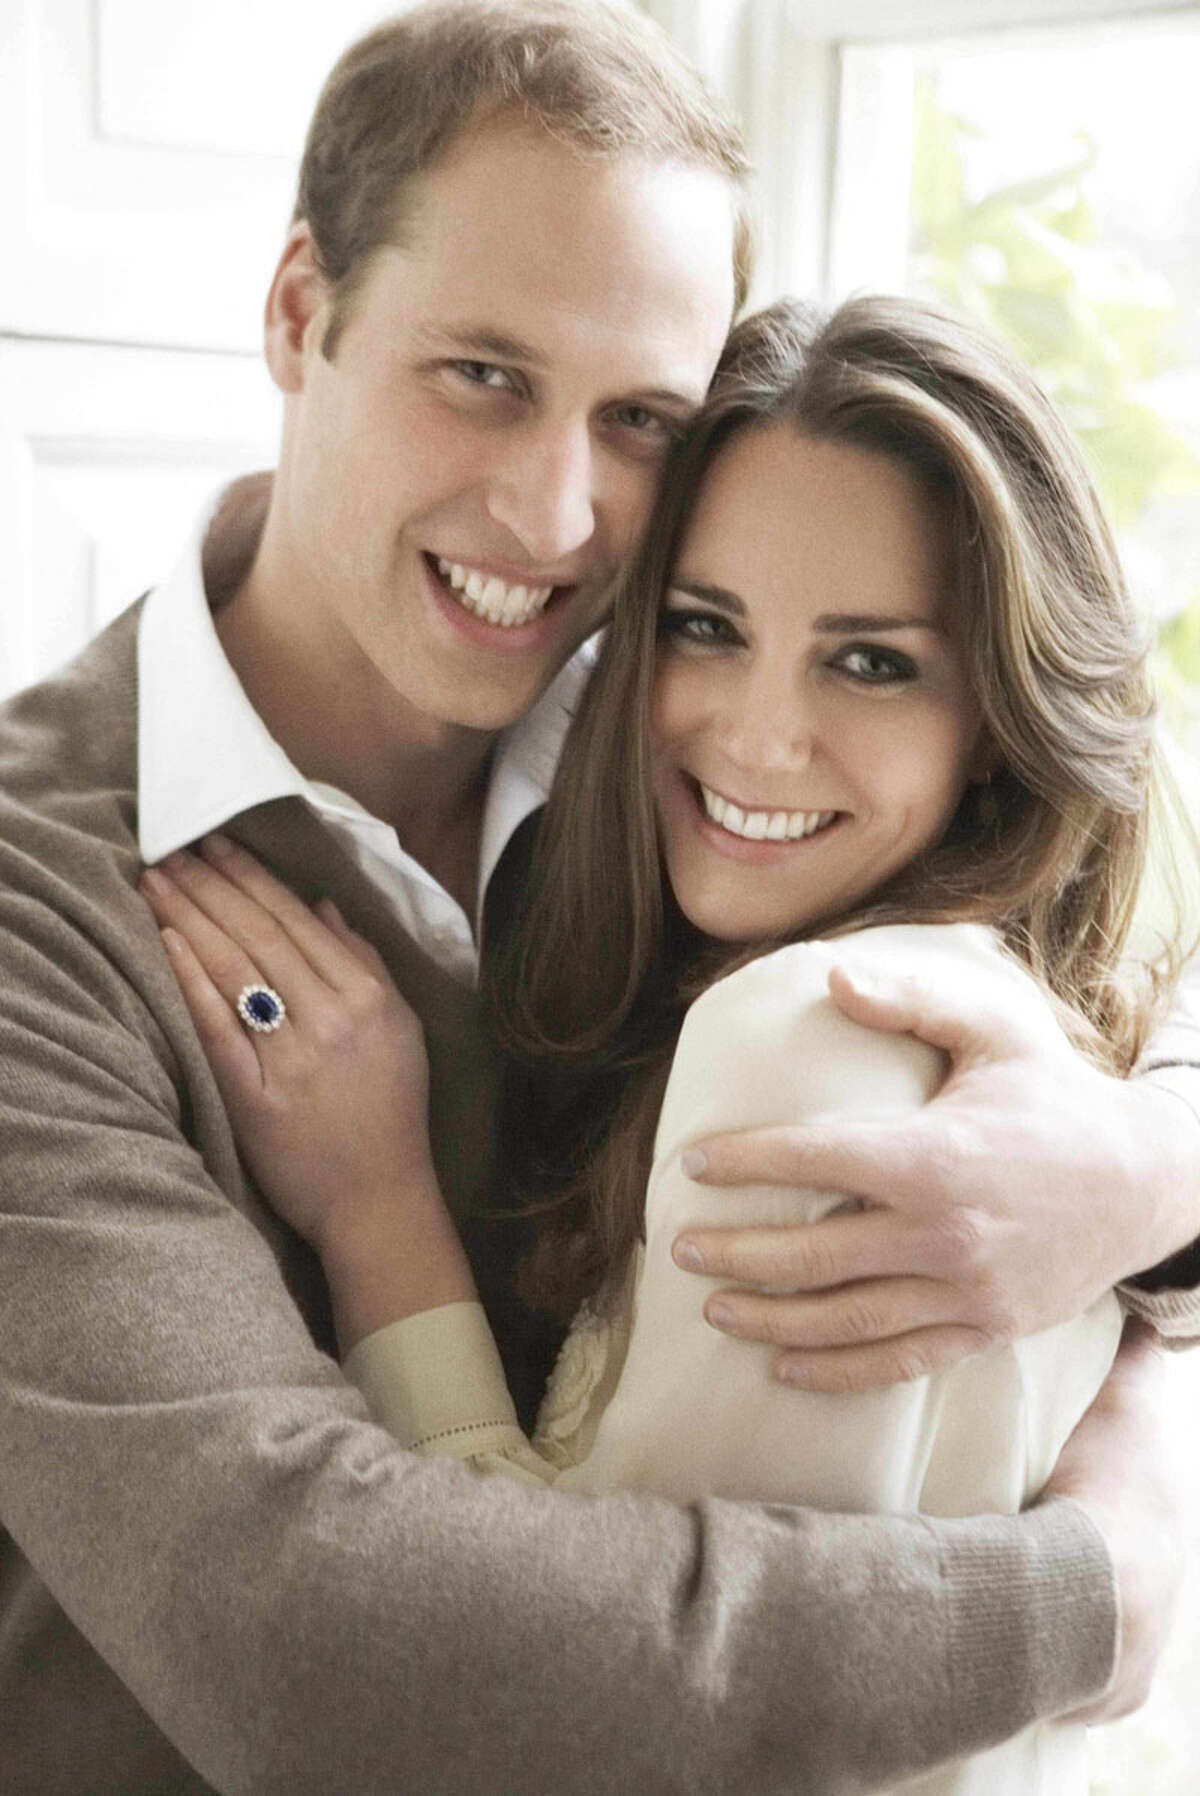 The engagement of Britain's Prince William and Kate Middleton was announced on November 16, 2010.